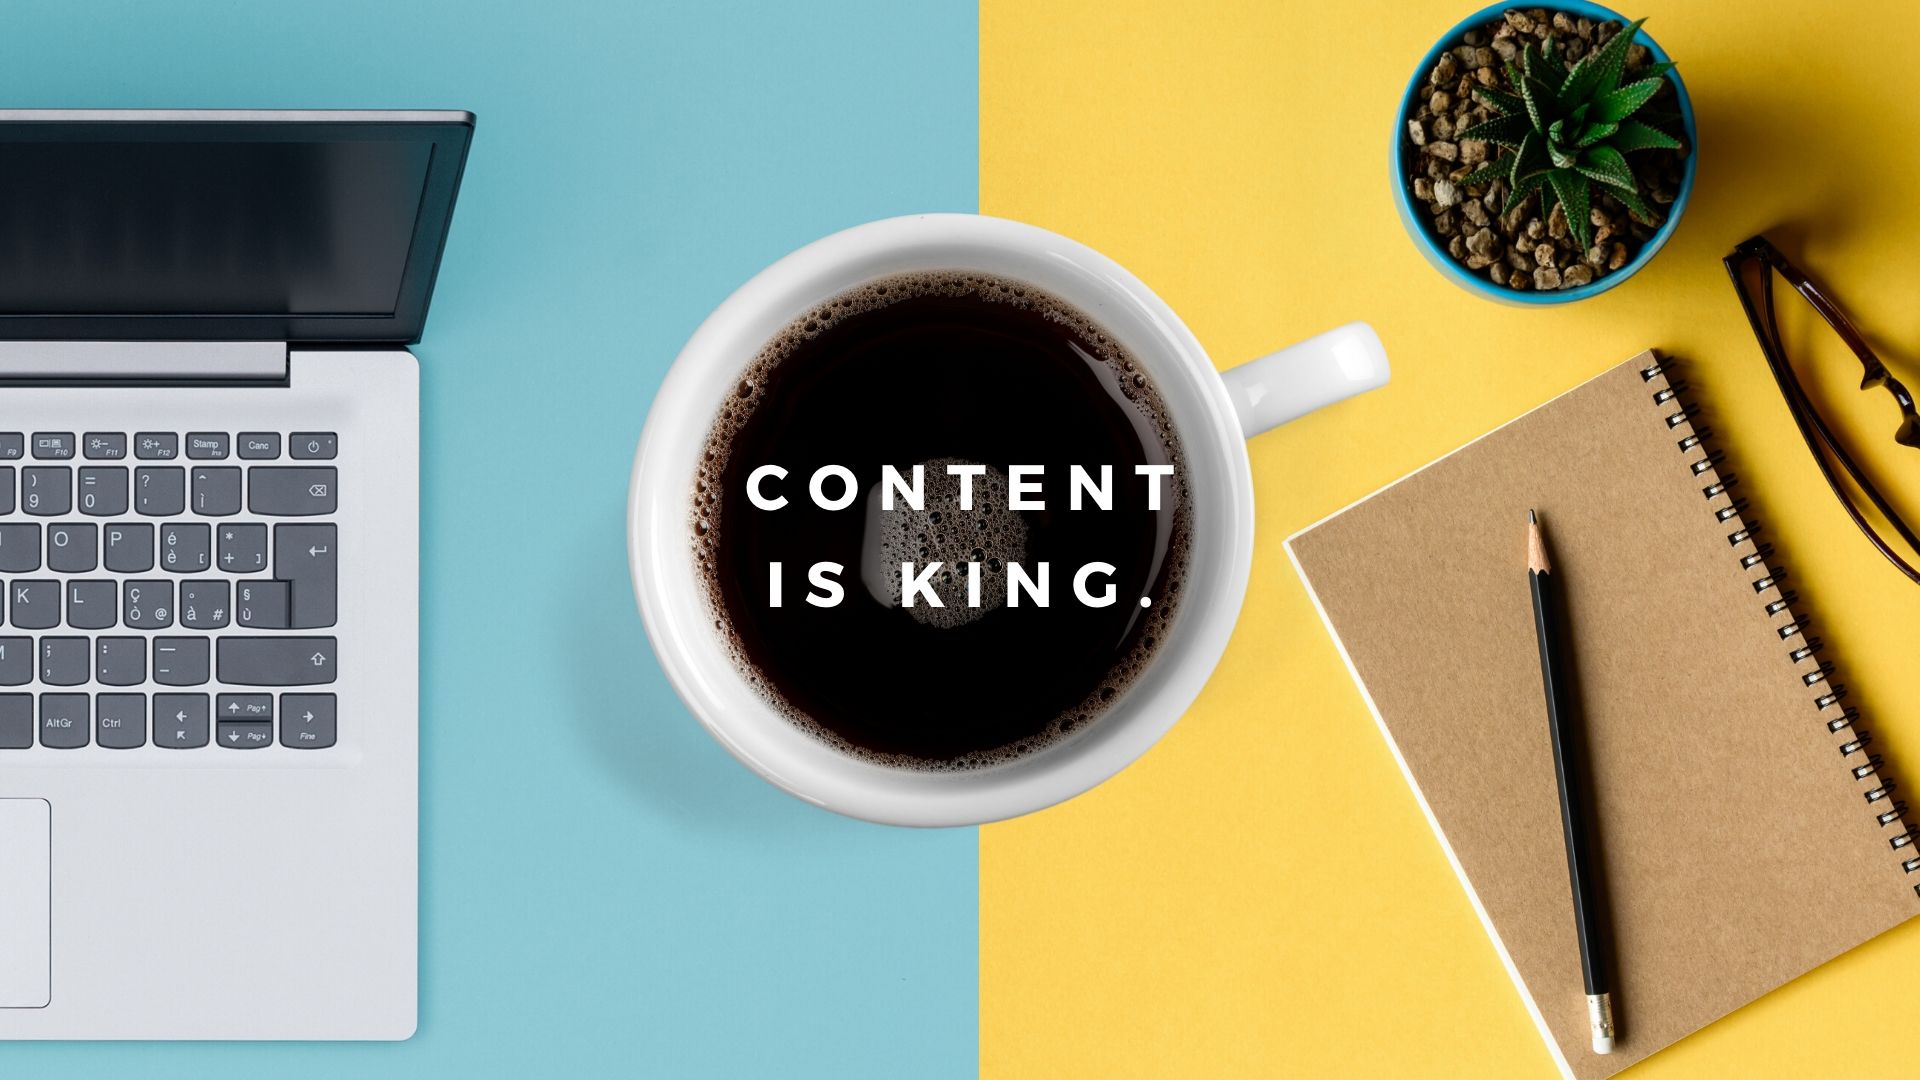 Business Growth Depends on Quality Content: Tips for Telling Better Digital Stories